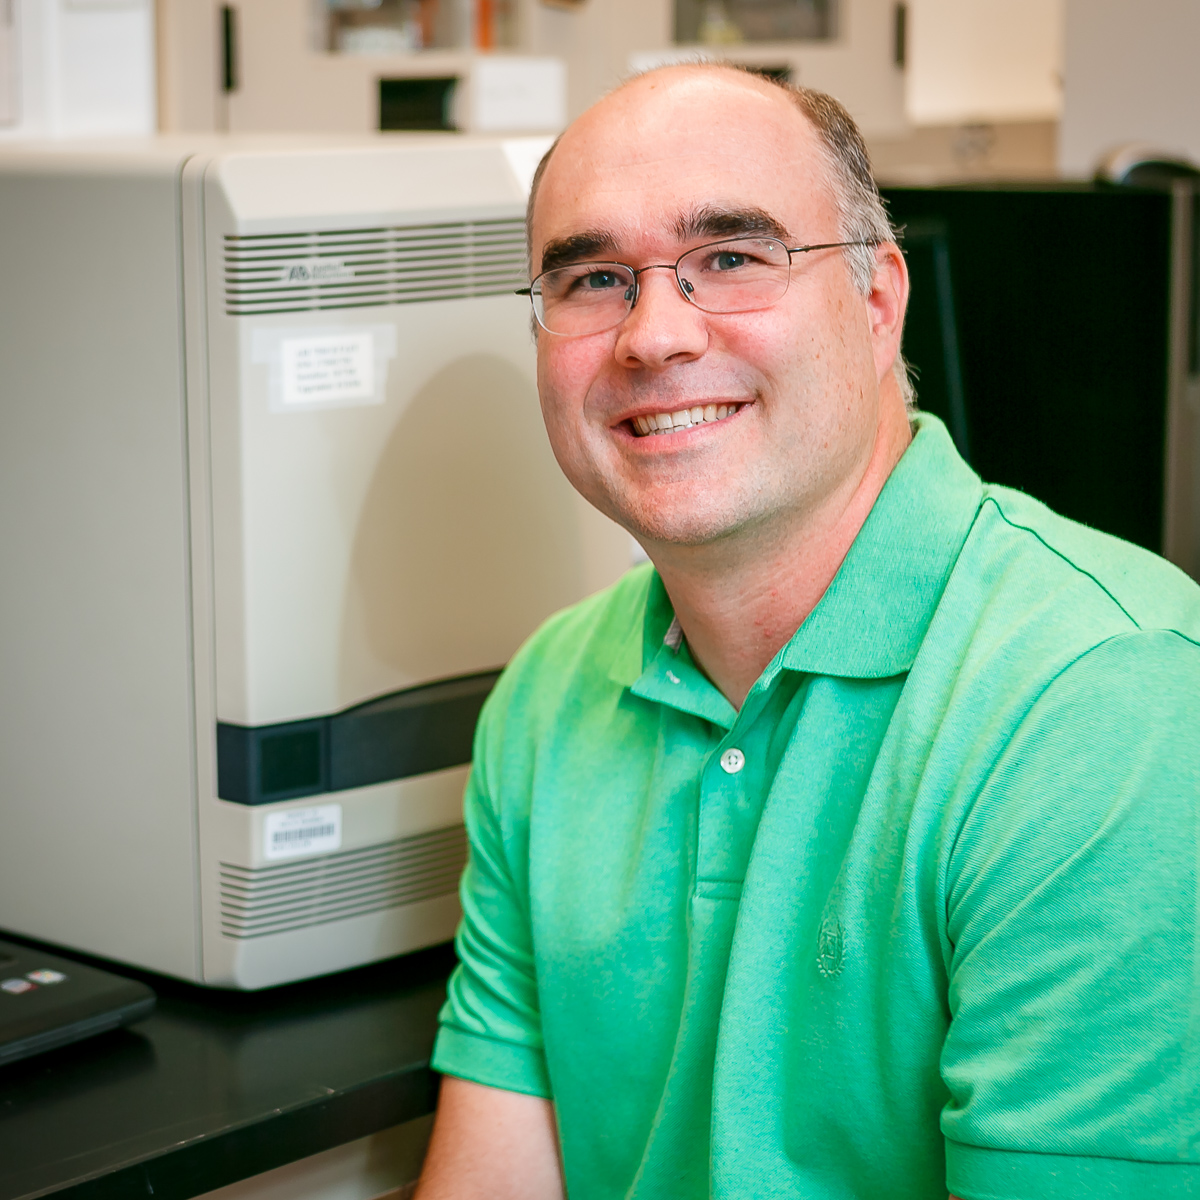 Dr. Patrick Bryant, Director of the Enteric Virology Laboratory